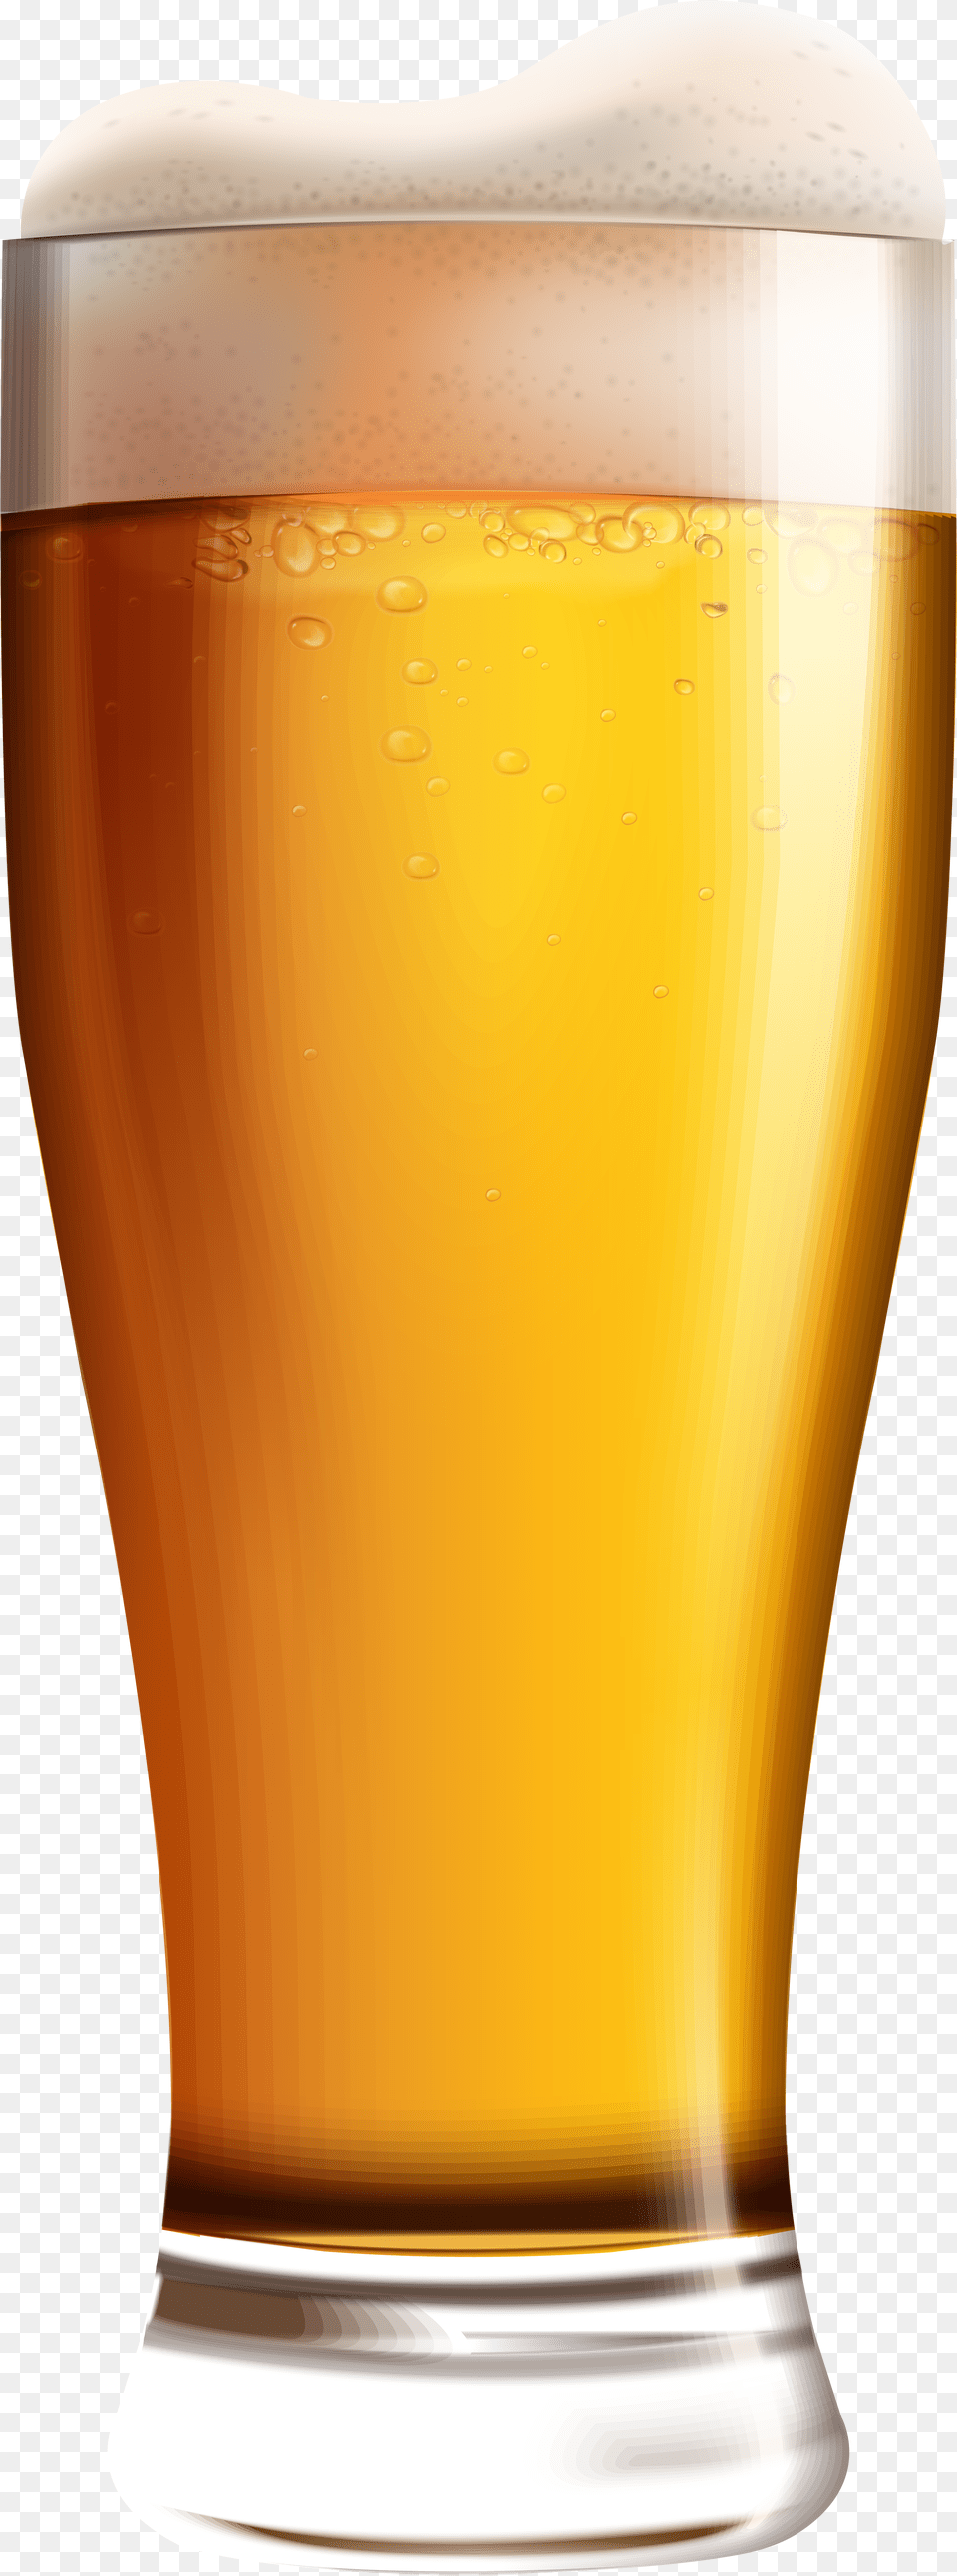 Beer In A Glass, Alcohol, Beer Glass, Beverage, Liquor Png Image